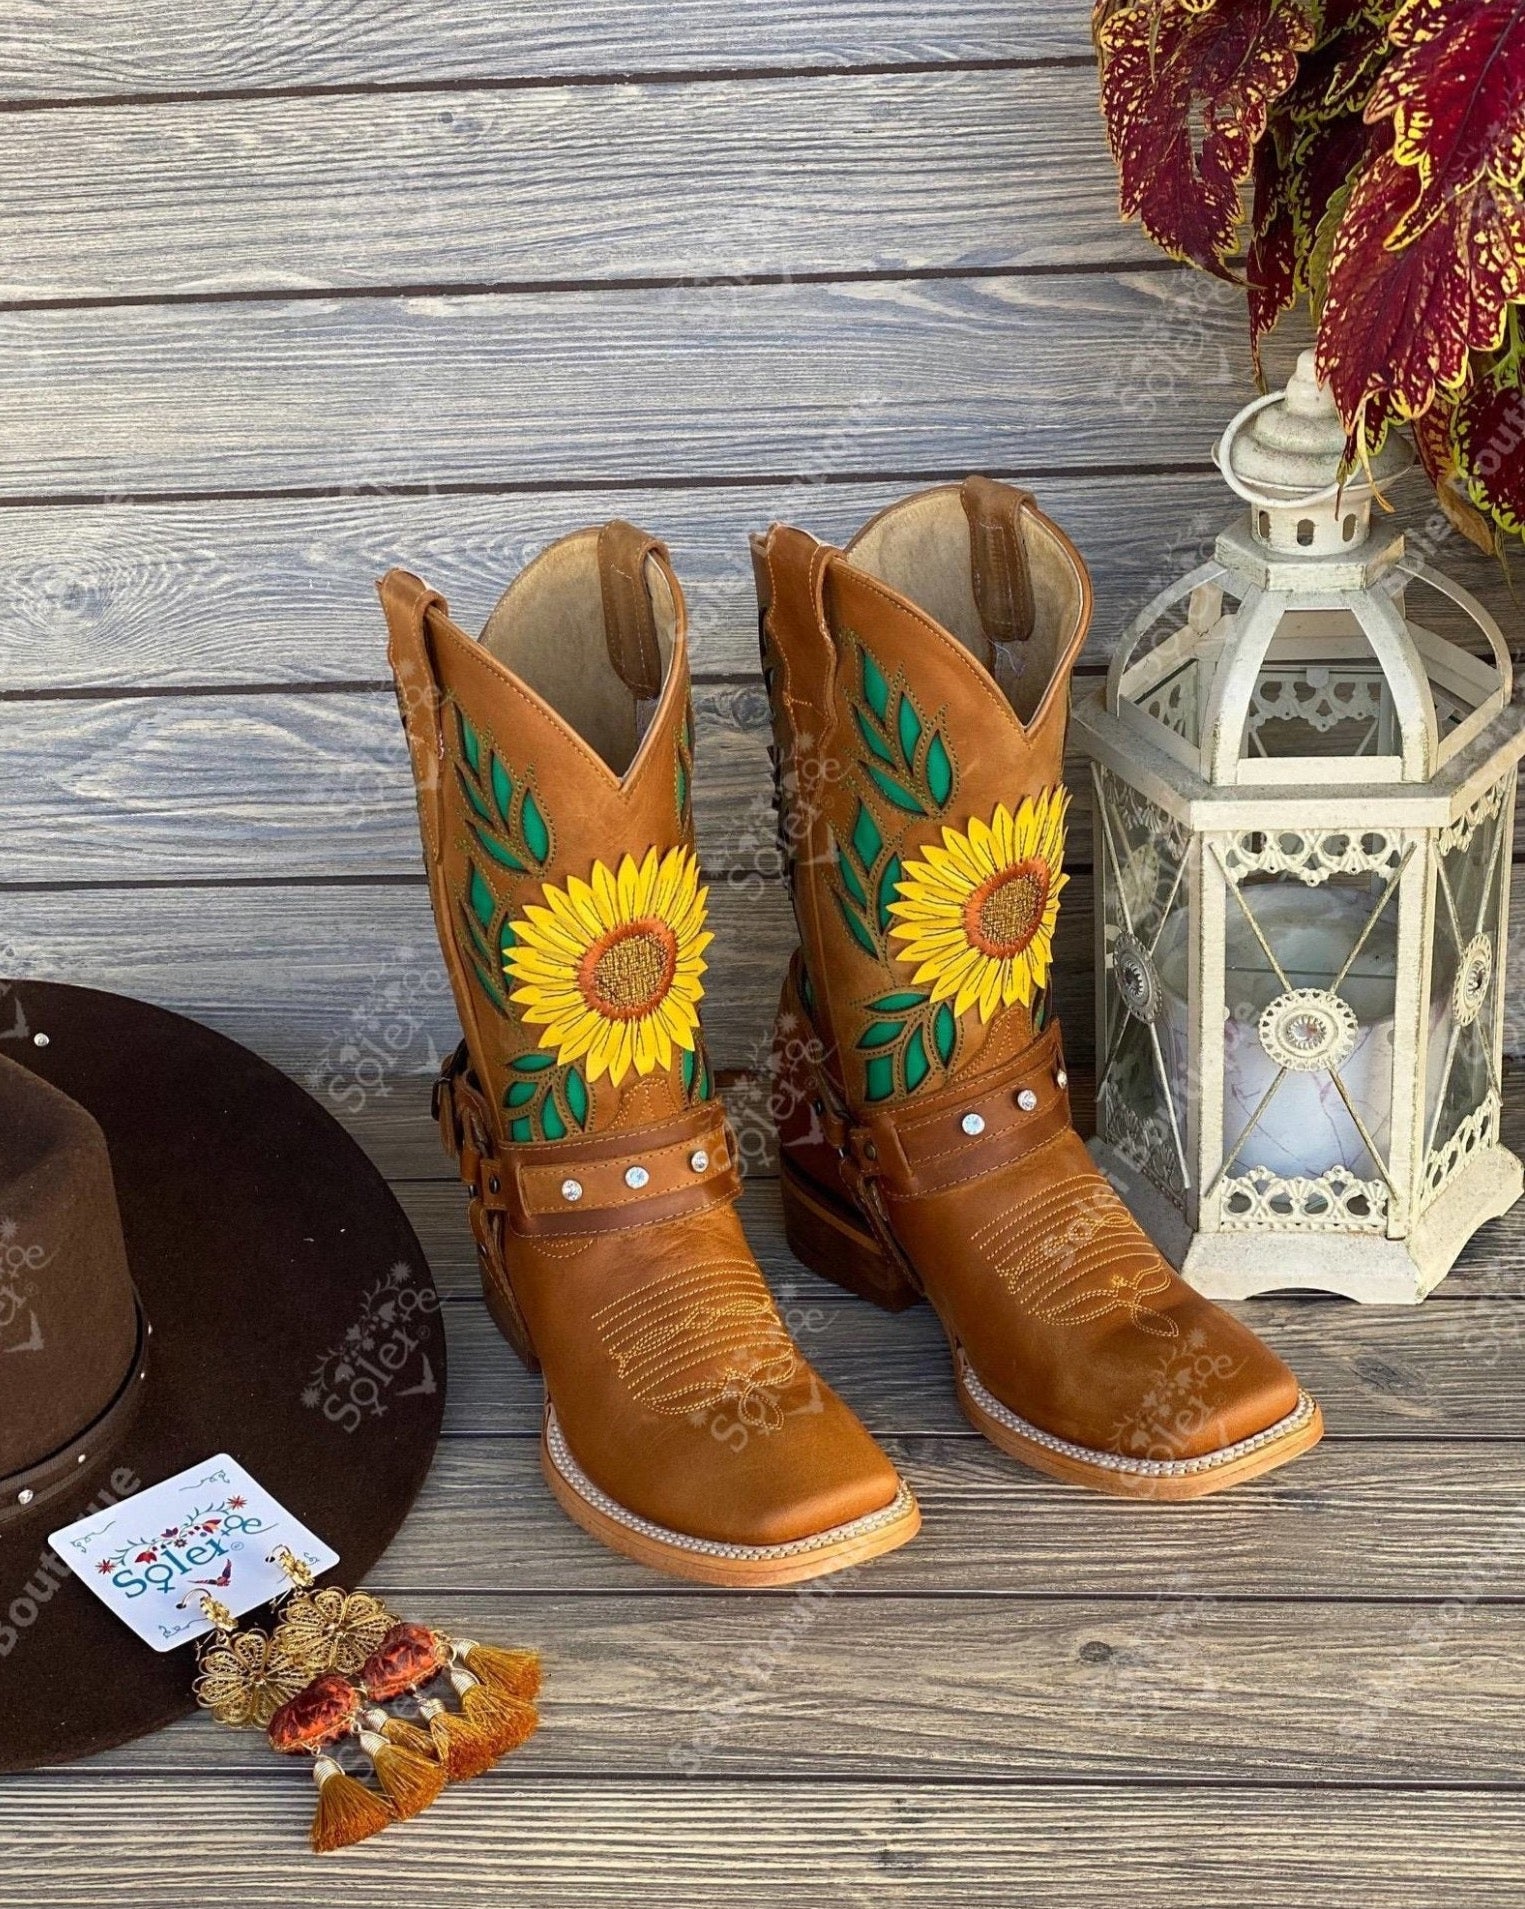 Women's Artisanal Mexican Boot. Leather Sunflower Embroidered Boot. Girasol Boots - Solei Store